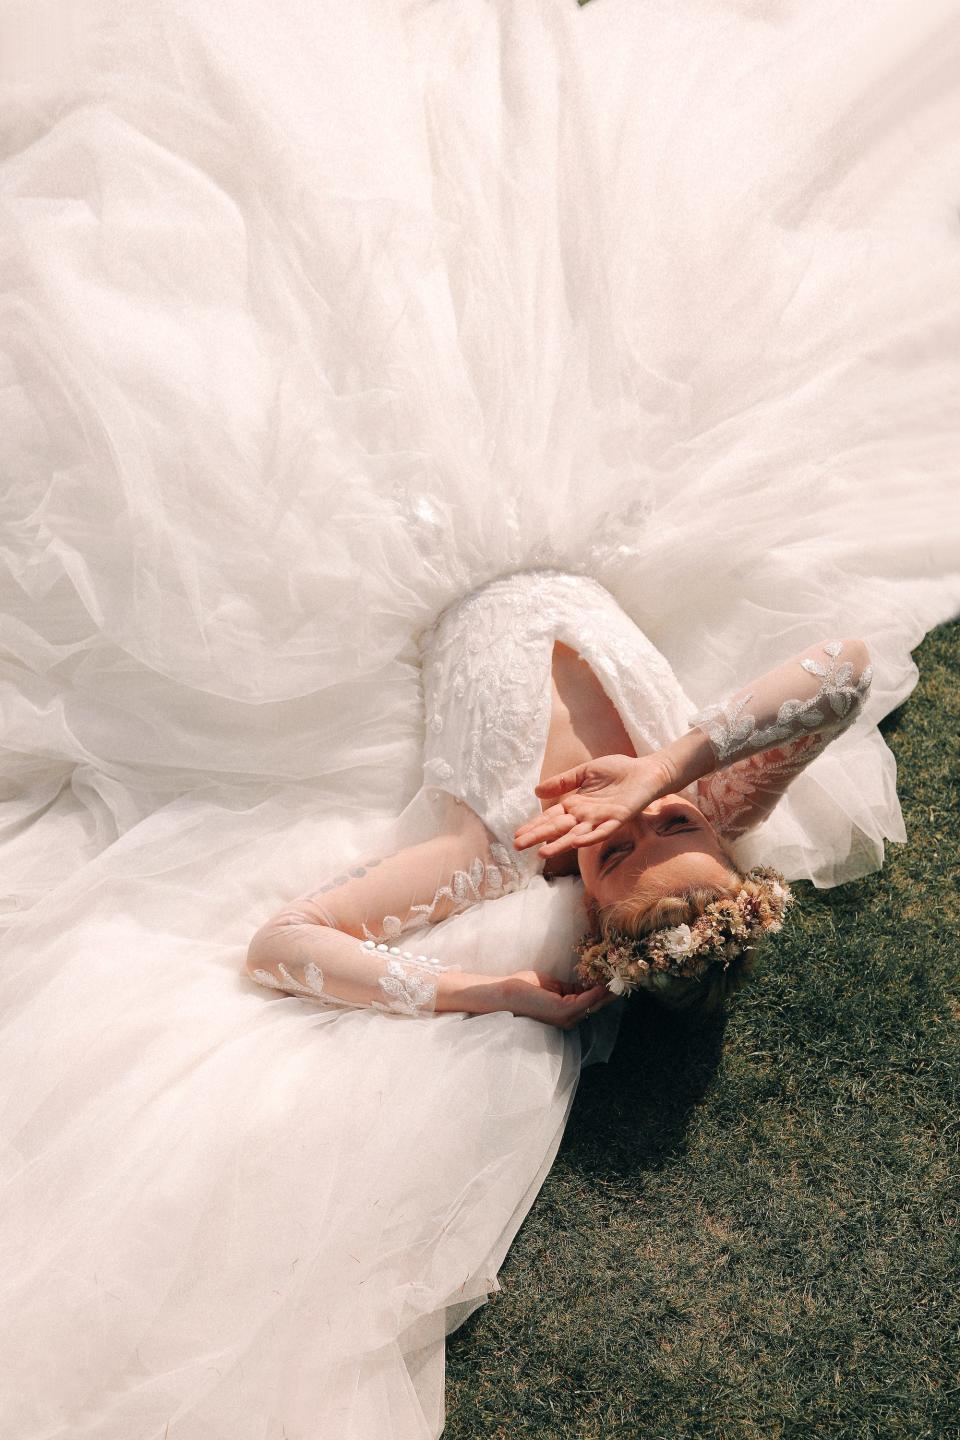 A person in a wedding dress lays on grass and covers her face.